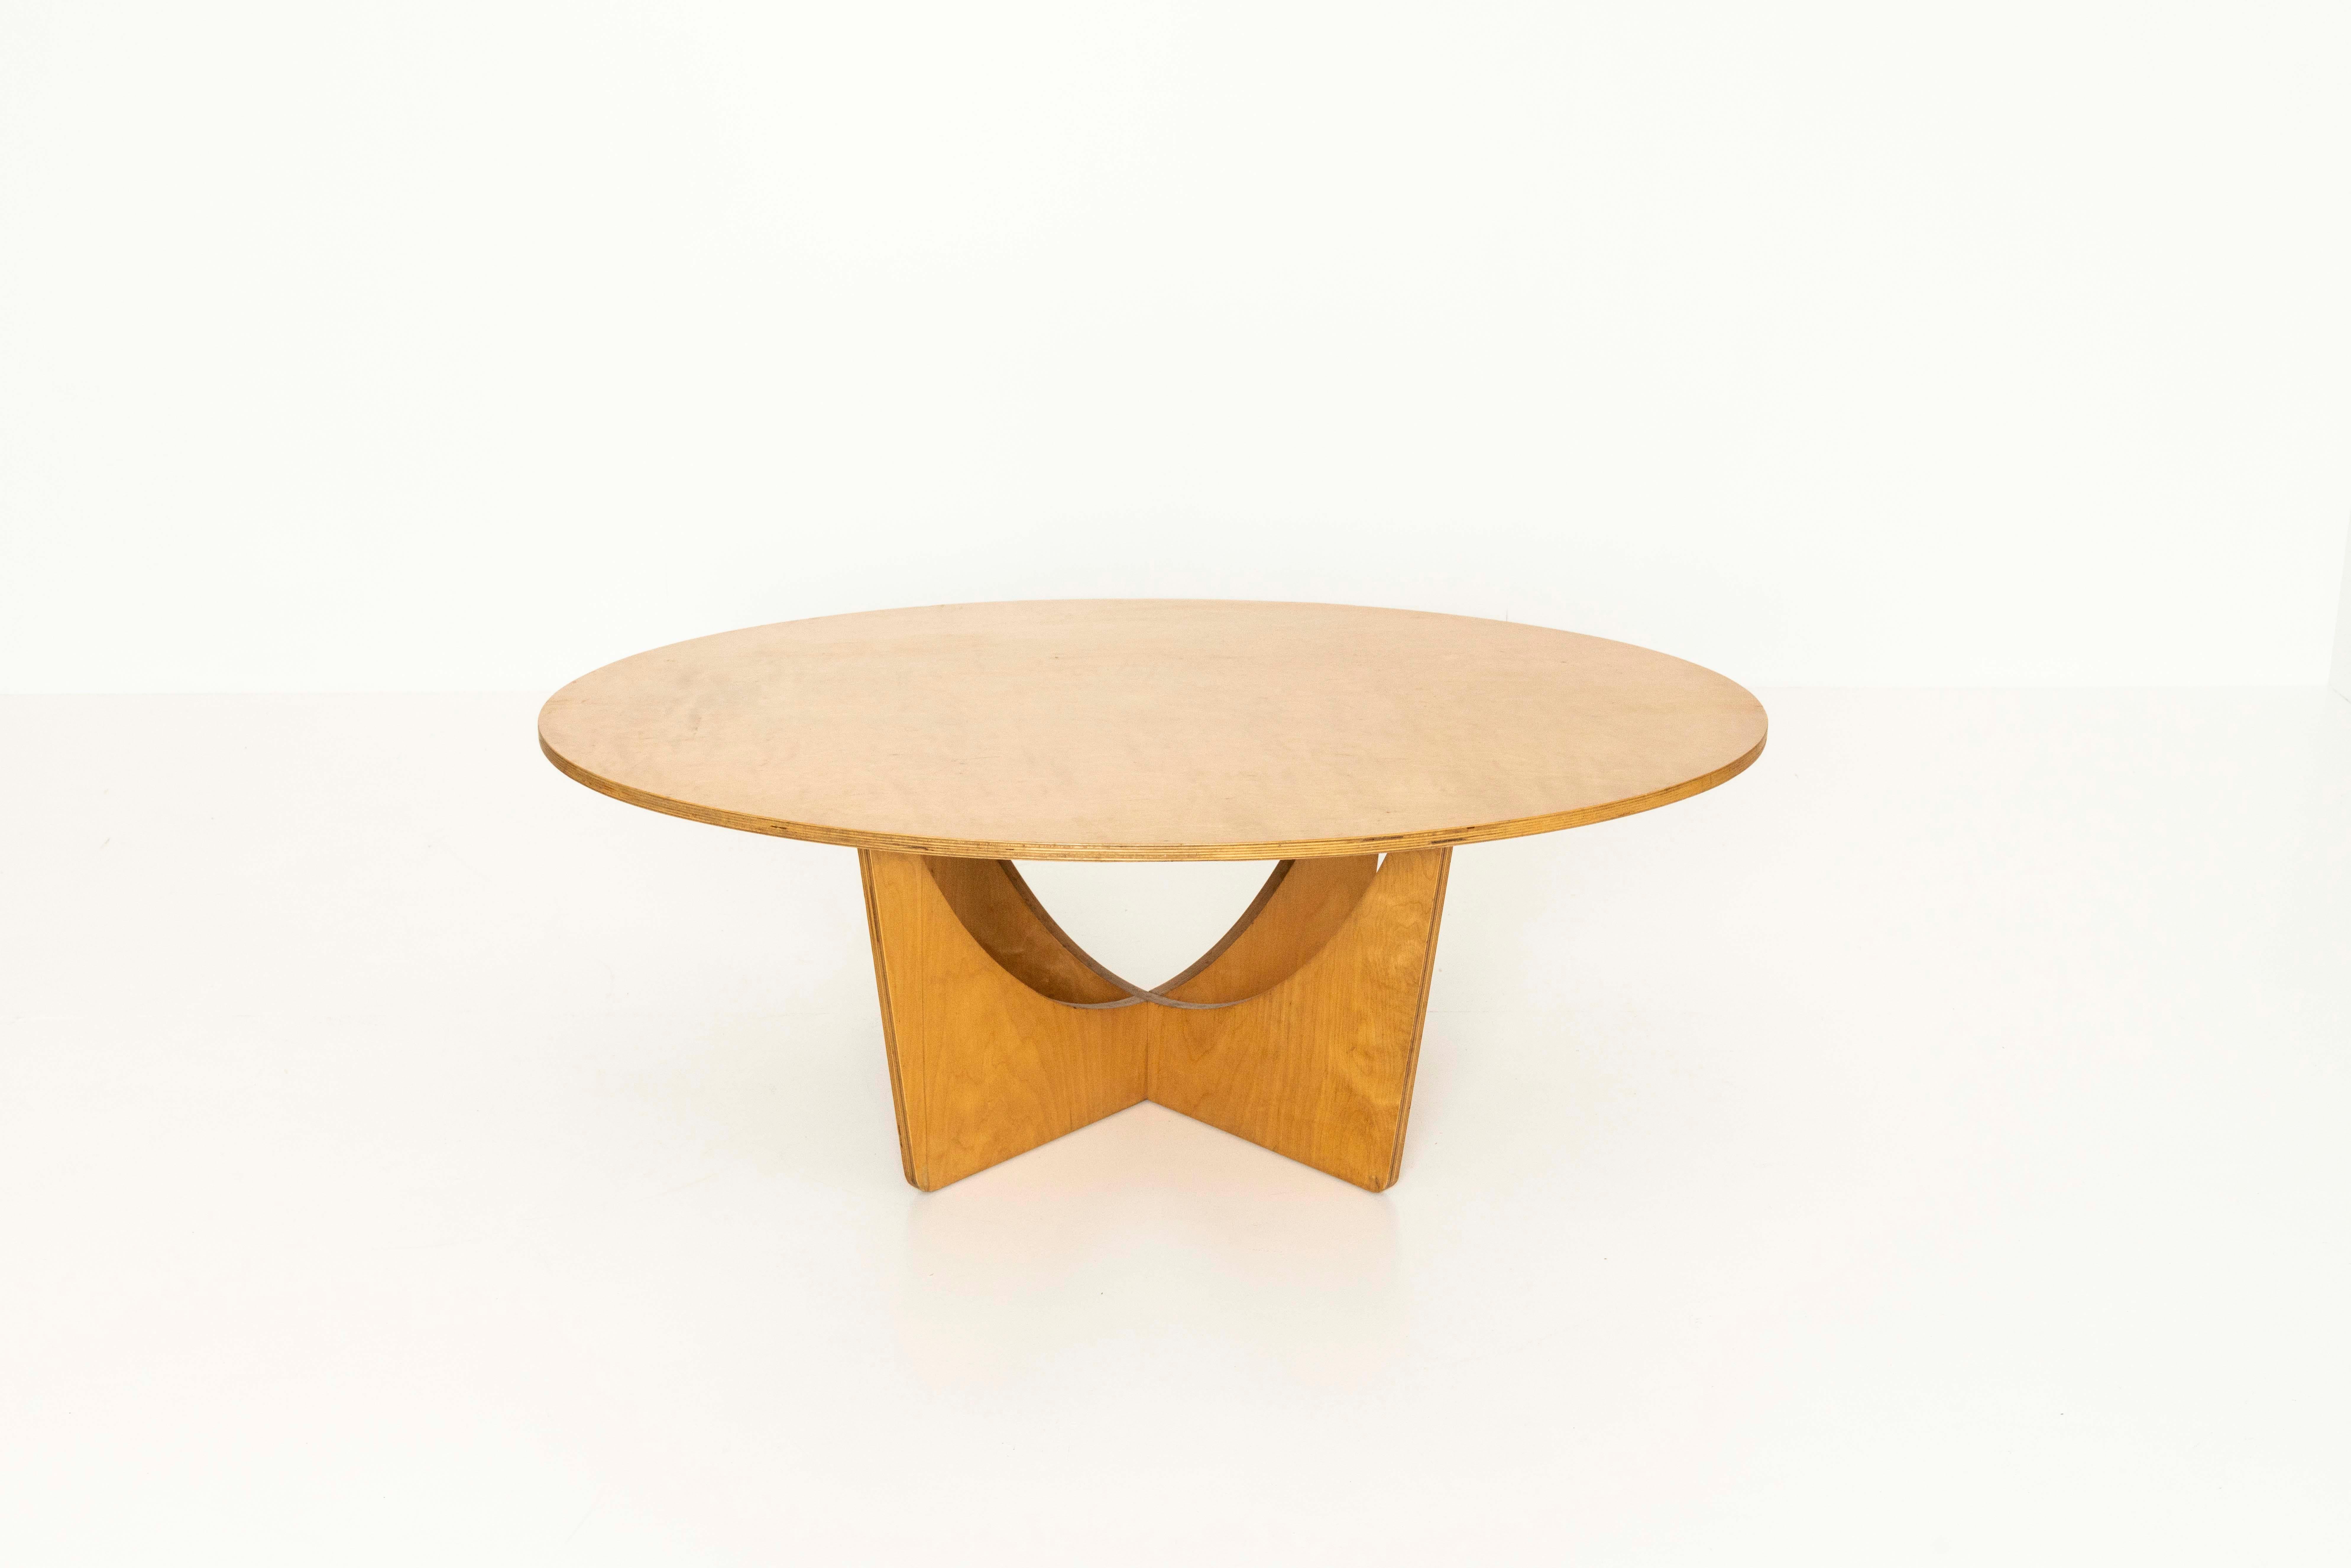 Vintage coffee table in The Style of British designer Gerald Summers, 1950s. This table has an oval top and an interestingly shaped base. It is made of plywood and has an attractive design. The table has some wear and tear due to its age, however